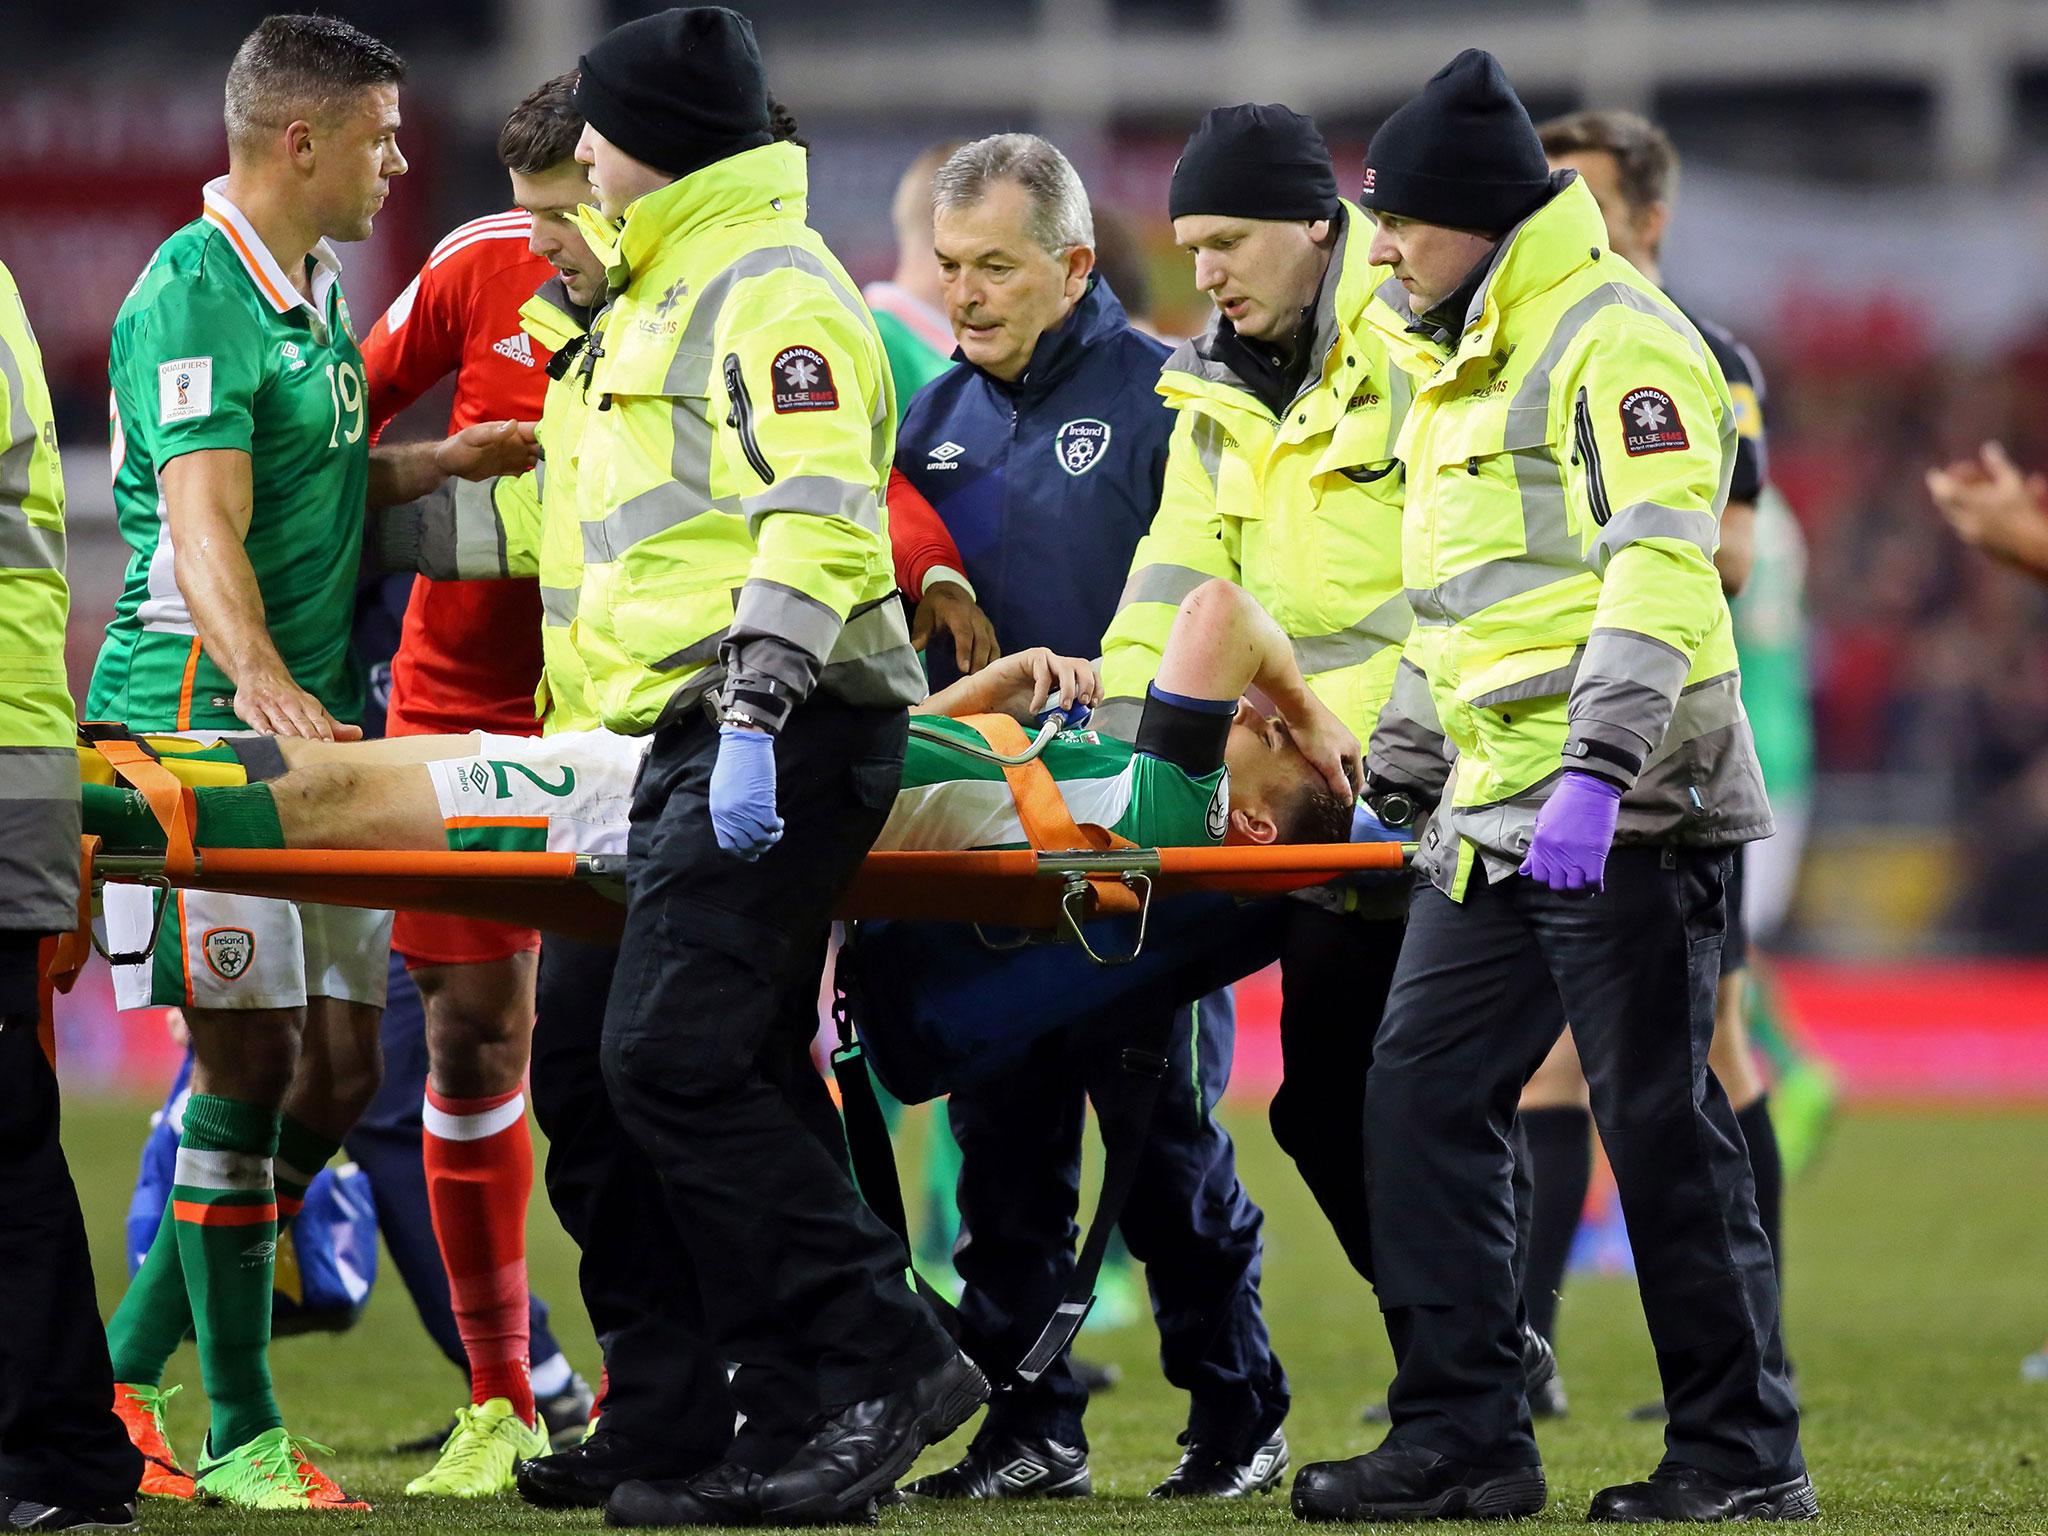 Coleman has gone on to make a full recovery